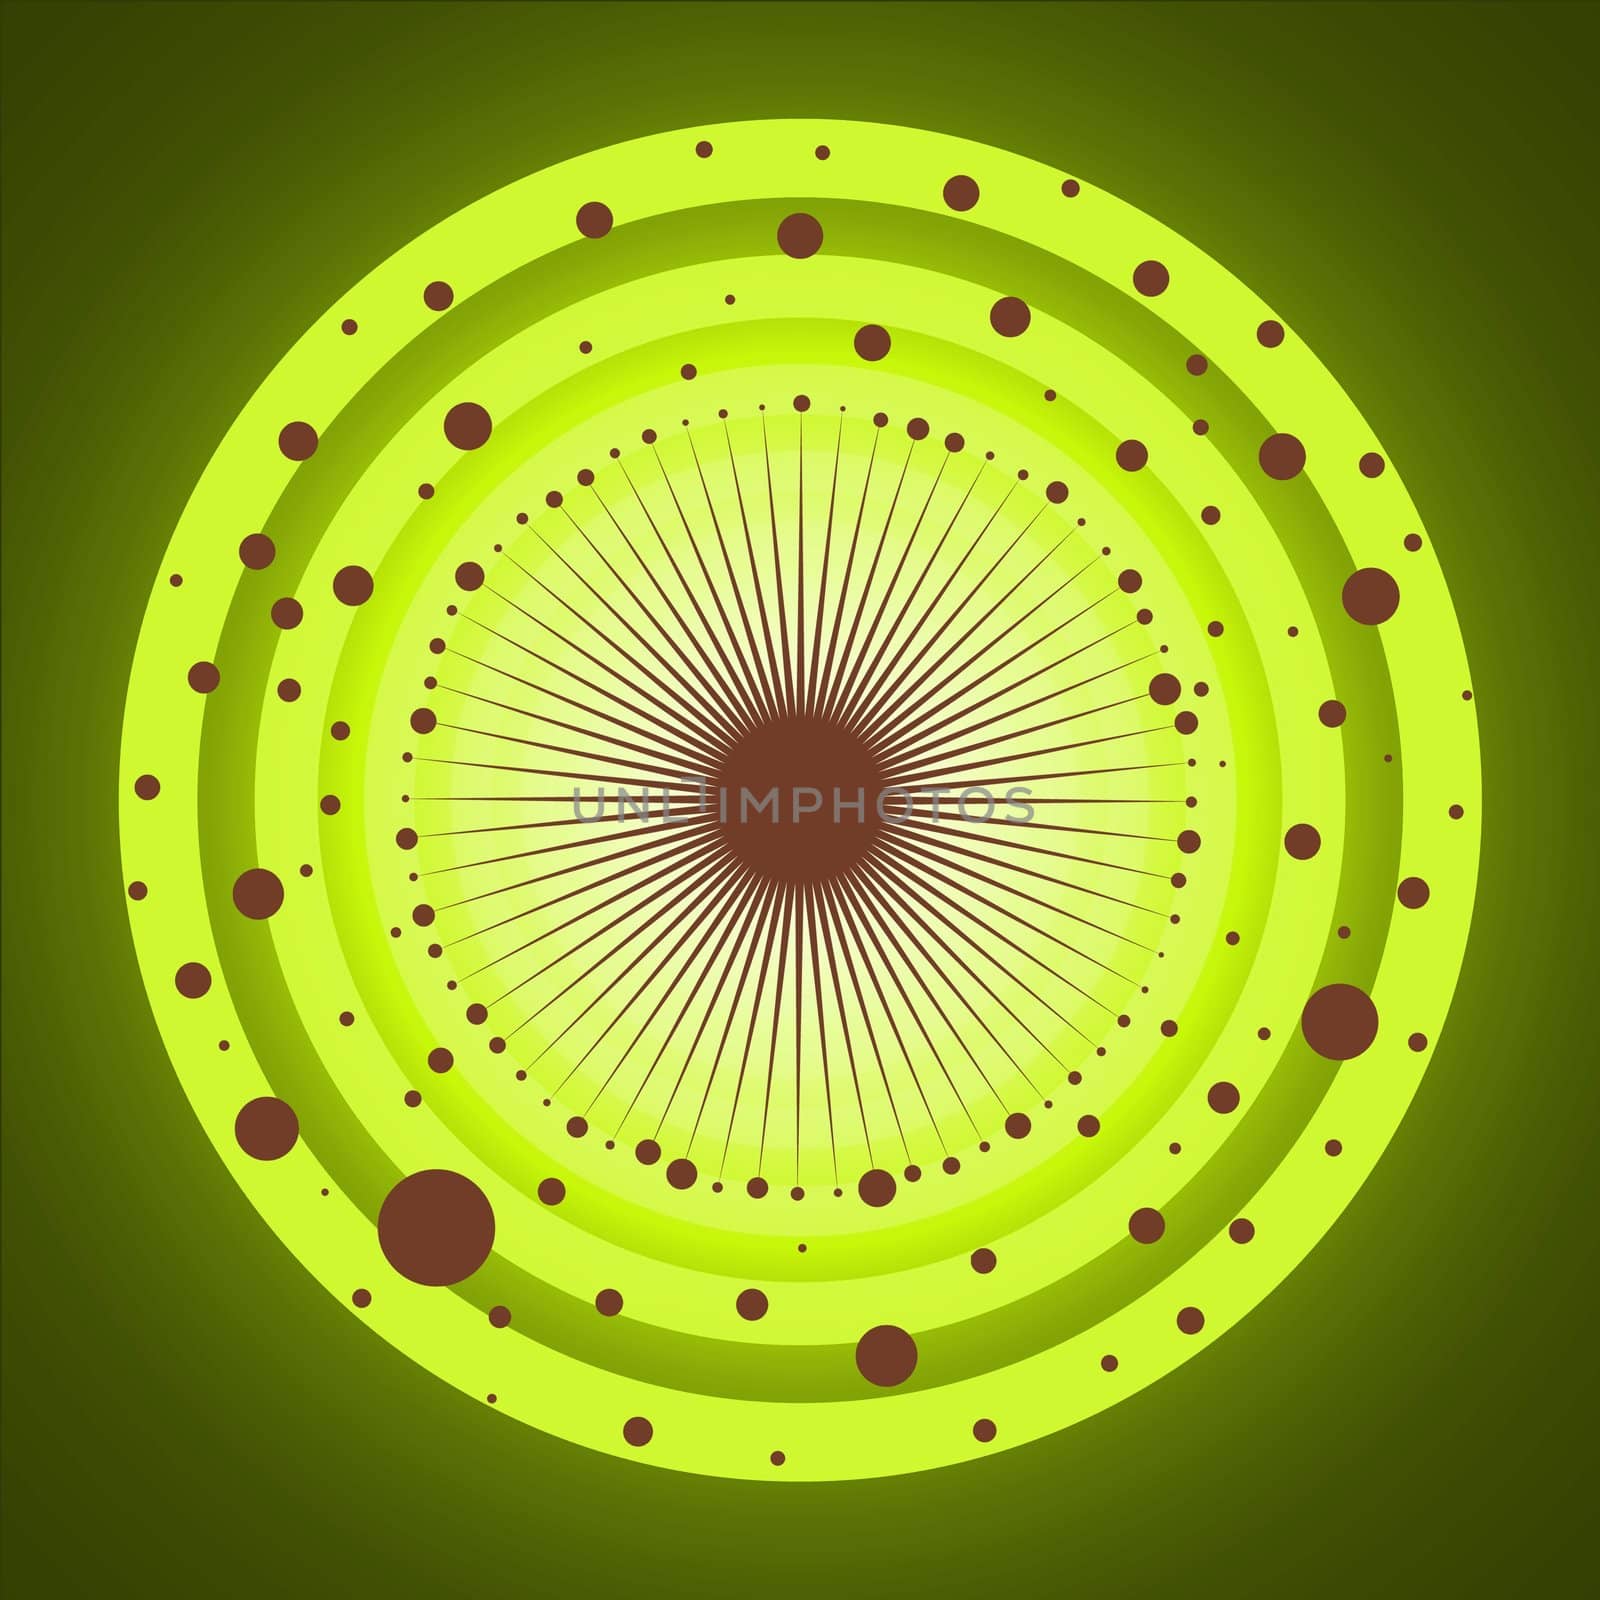 Illustration of green circles with brown spots